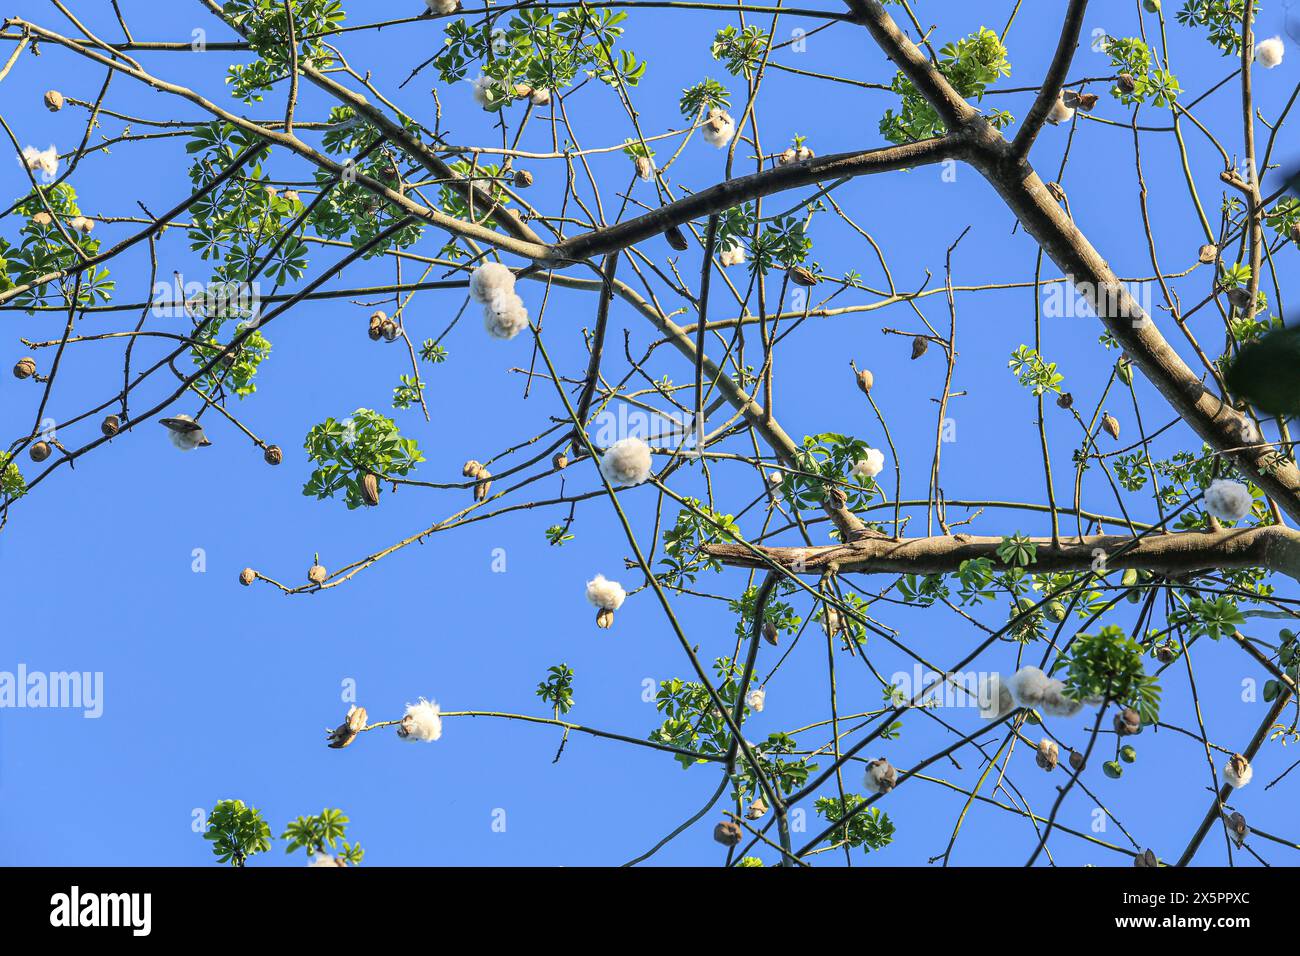 Imus, Philippines. May 10, 2024: Kapok trees (Ceiba Pentandra) bloom is late due to extreme heat & drought caused by exceptional El Nino that hit Southeast Asia. Usually, falling fluffs occur in mid-March, creating popular summer snowy scenes in tropical countries. This year, seed pods are just starting to open on trees near waterways and are still closed on trees that haven't seen rain for several months. Kapok fibers are used in organic pillows/duvets. For many weeks, heat indices in many areas have reached danger level for humans, animals and vegetation. Credit: Kevin Izorce/Alamy Live News Stock Photo